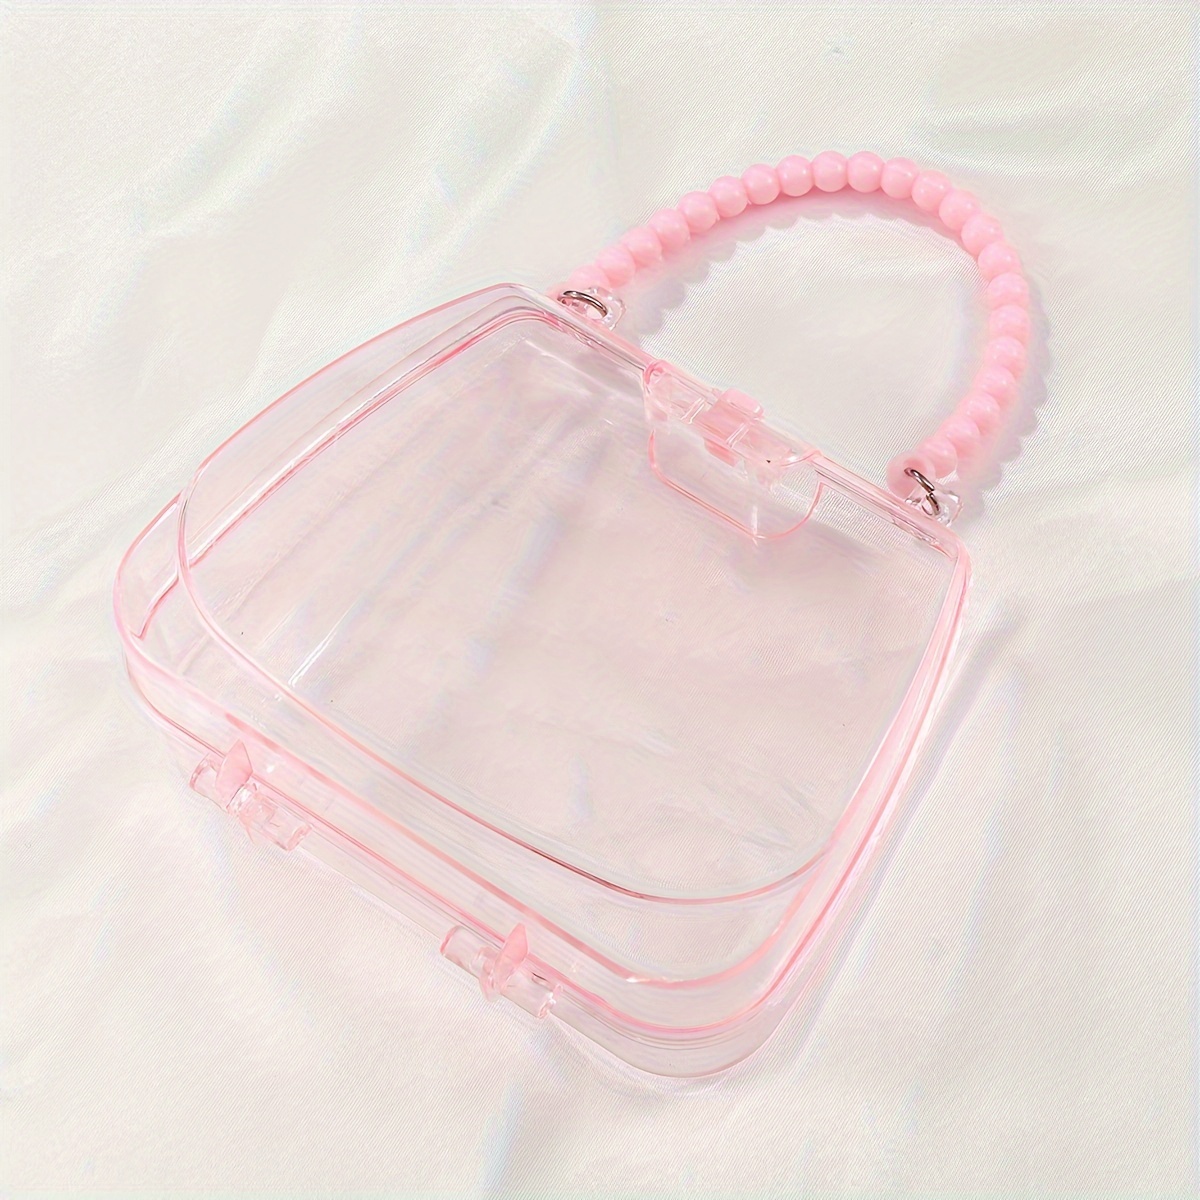 Plastic Bags Gift Bracelets, Small Pouches Clear Plastic